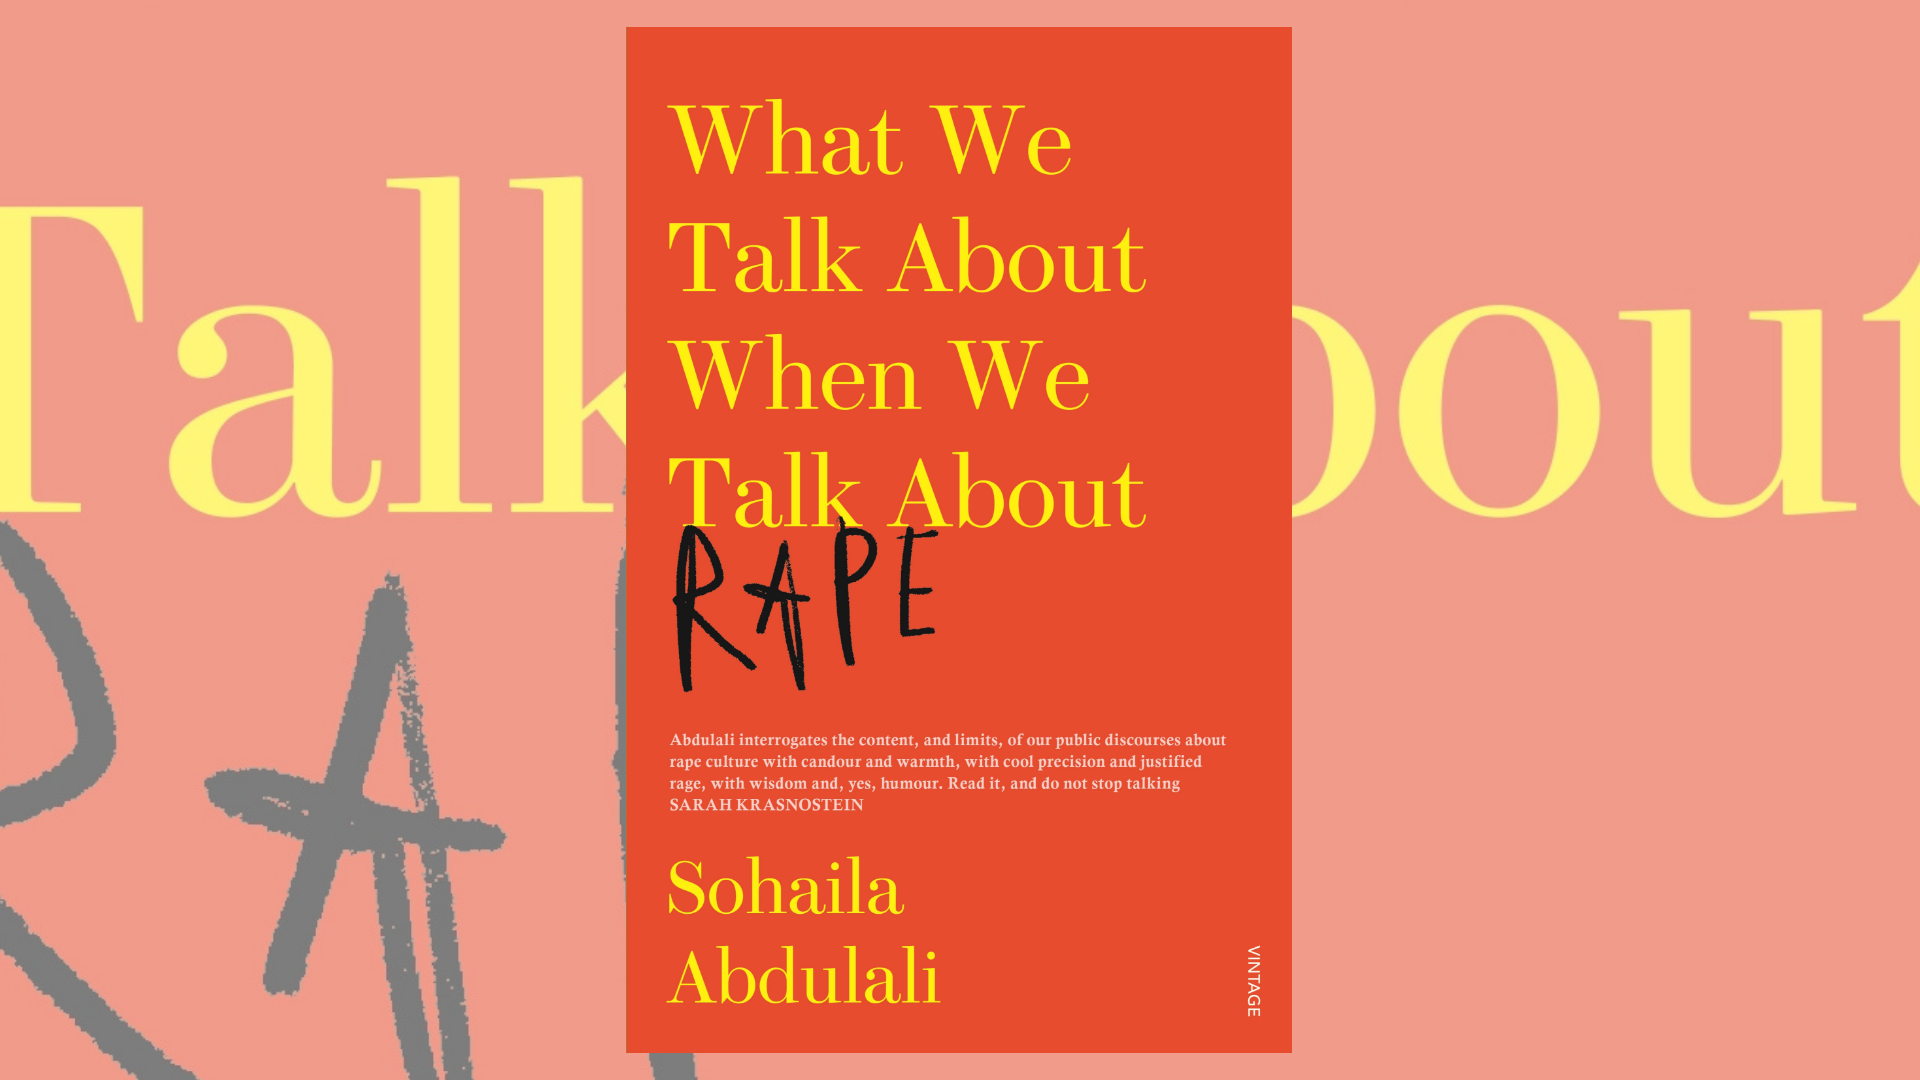 What We Talk About When We Talk about Rape by Sohaila Abdulali